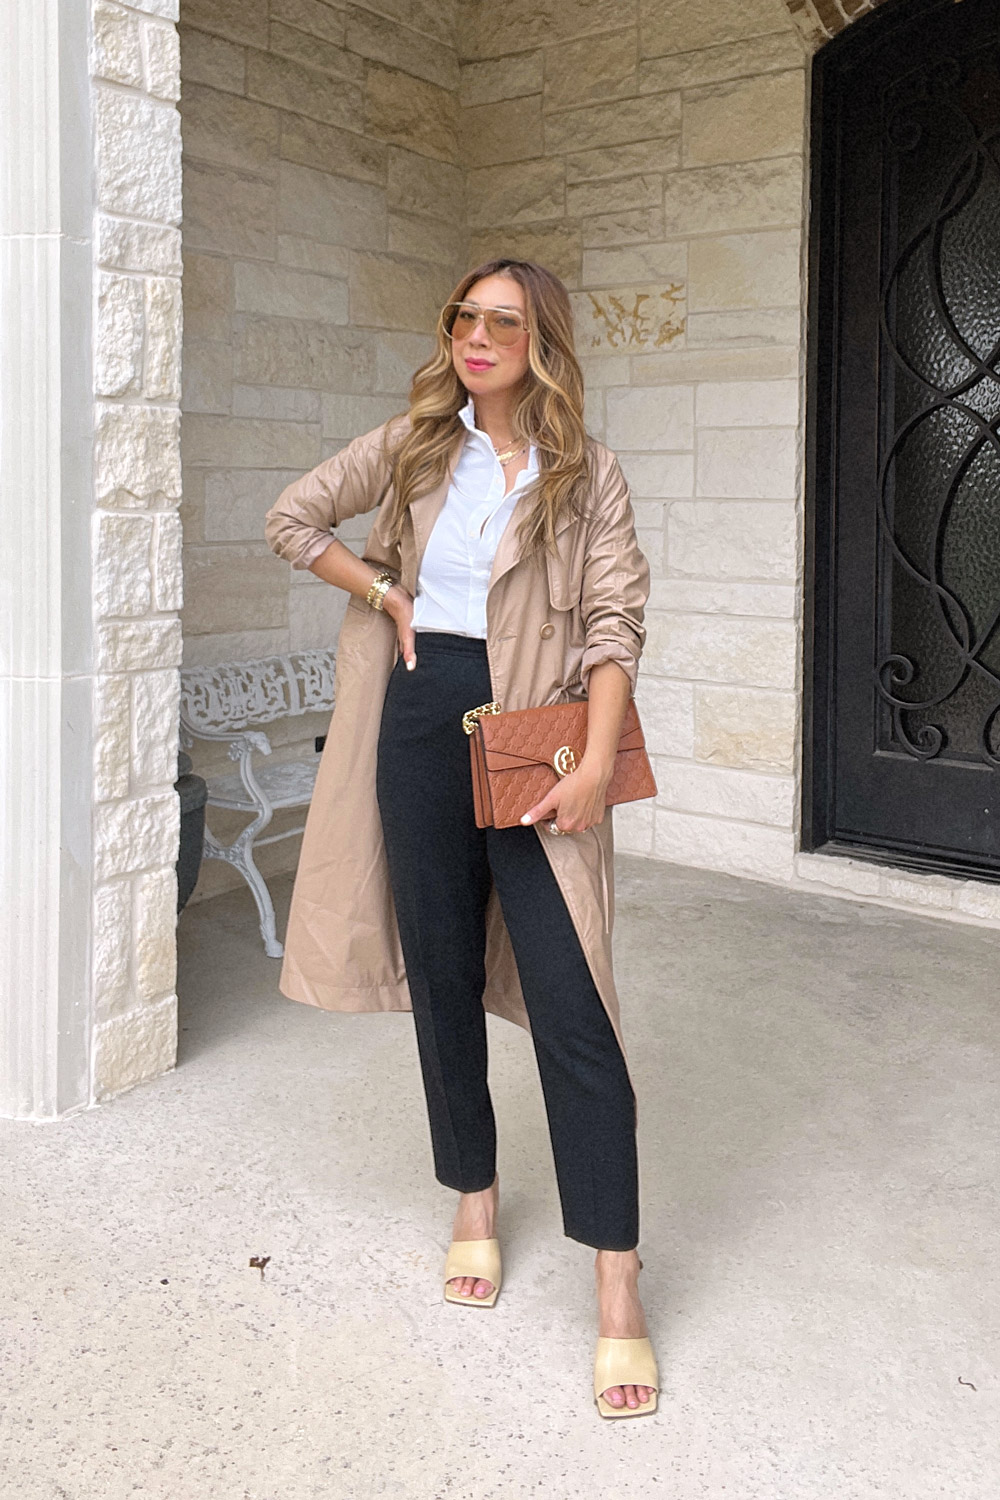 Freshen up your fall wardrobe, fall style finds, transition wardrobe from summer to fall, leather pieces for fall, fall wardrobe basics, faux fur for fall, shearling for fall, sam stewart, style of sam, erin Busbee, fashion blogger over 40, telluride CO, open edit faux leather trench, Nic + Joe straightleg pants, dior aviator sunglasses